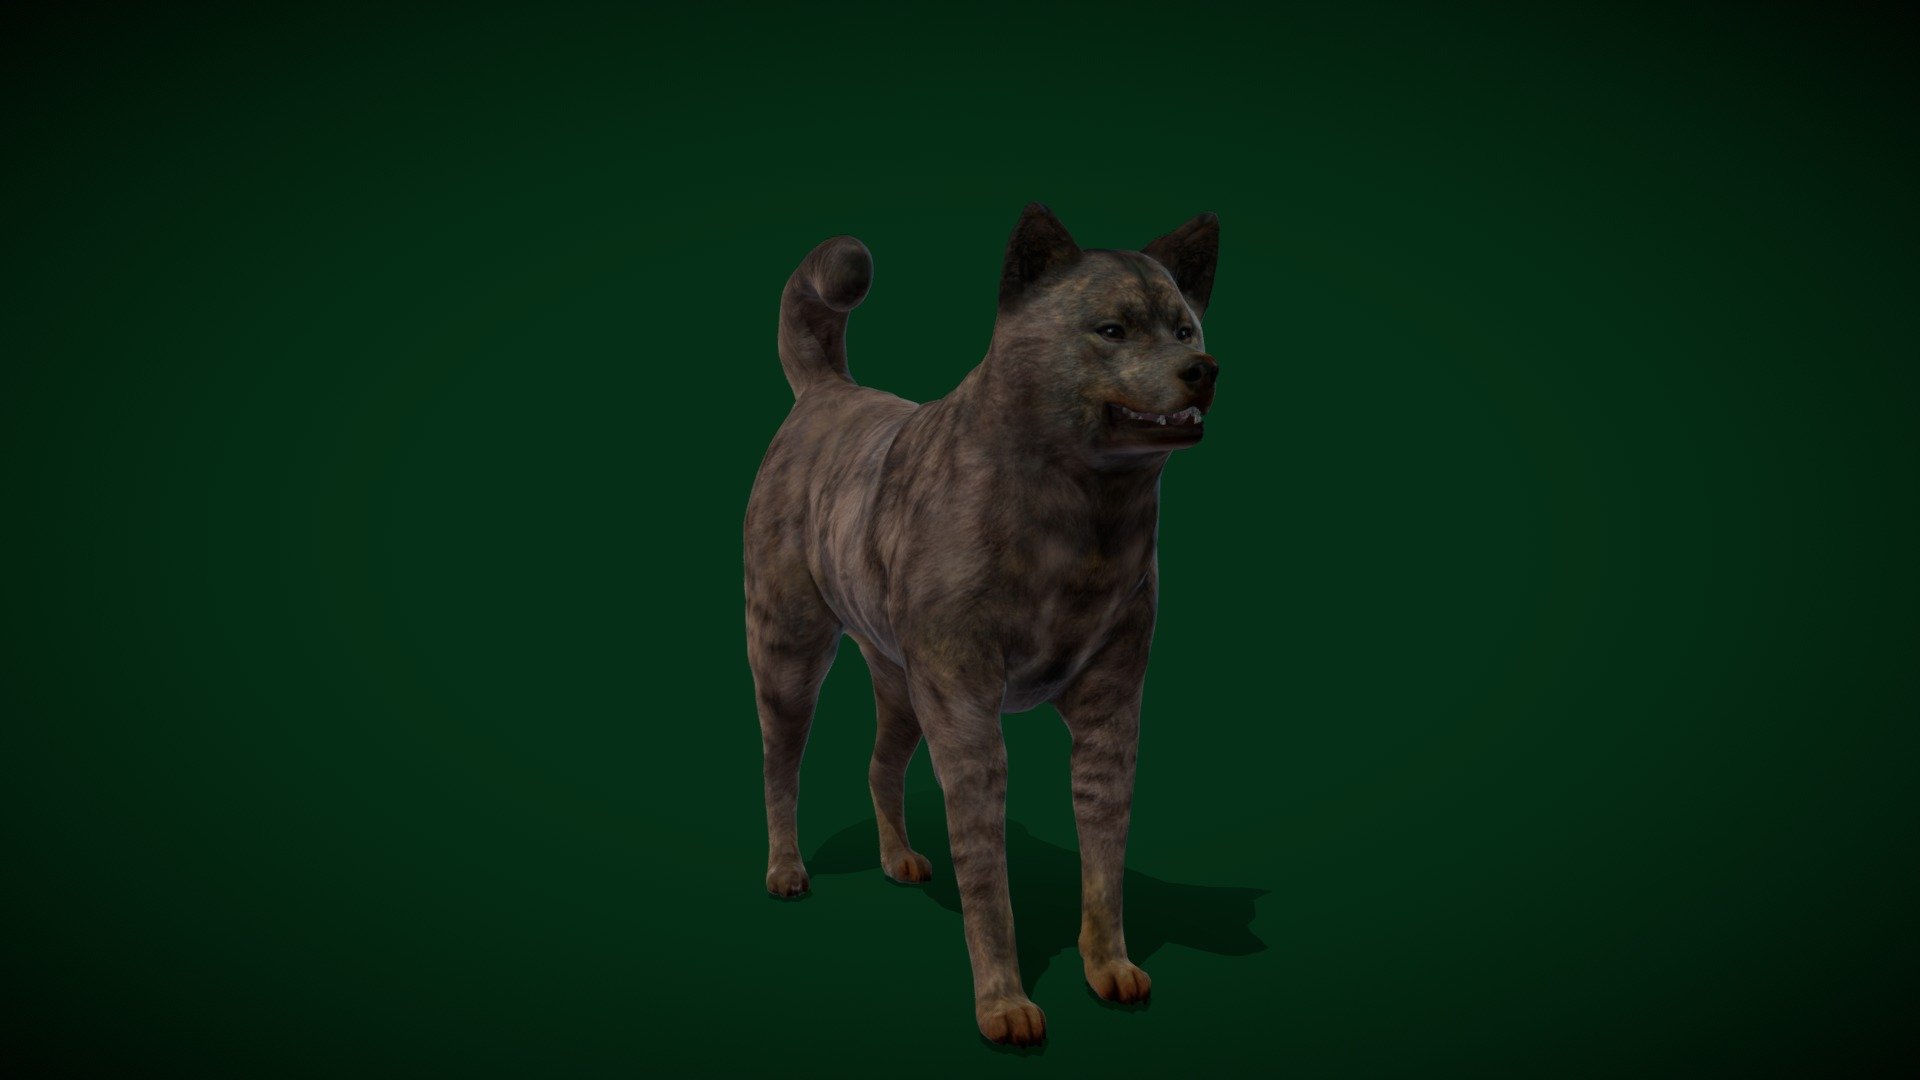 Kai Ken Dog Breed(Japan_Inu Breed) medium-sized, Tora Inu, Tiger Dog,Striped Coat

Canis lupus familiaris Animal Mammal(Japan's Yamanashi Prefecture)Pet,Hunt Game Dog,Nihon Ken Hozonkai

1 Draw Calls

MidPoly

Game Ready Asset

Subdivision Surface Ready

9- Animations

4K PBR Textures Material

Unreal FBX (Unreal 4,5 Plus)

Unity FBX

Blend File 3.6.5 LTS

USDZ File (AR Ready). Real Scale Dimension (Xcode ,Reality Composer, Keynote Ready)

Textures Files

GLB File (Unreal 5.1 Plus Native Support)

Gltf File ( Spark AR, Lens Studio(SnapChat) , Effector(Tiktok) , Spline, Play Canvas,Omiverse ) Compatible




Triangles -54574



Faces -31508

Edges -58866

Vertices -27363

Diffuse, Metallic, Roughness , Normal Map ,Specular Map,AO

The Kai Ken is a breed of dog native to the Kai region, Yamanashi Prefecture, Japan, where it is a national monument. It is a rare dog even in its native land and is one of the six native Japanese dog breeds protected by the Nihon Ken Hozonkai 3d model